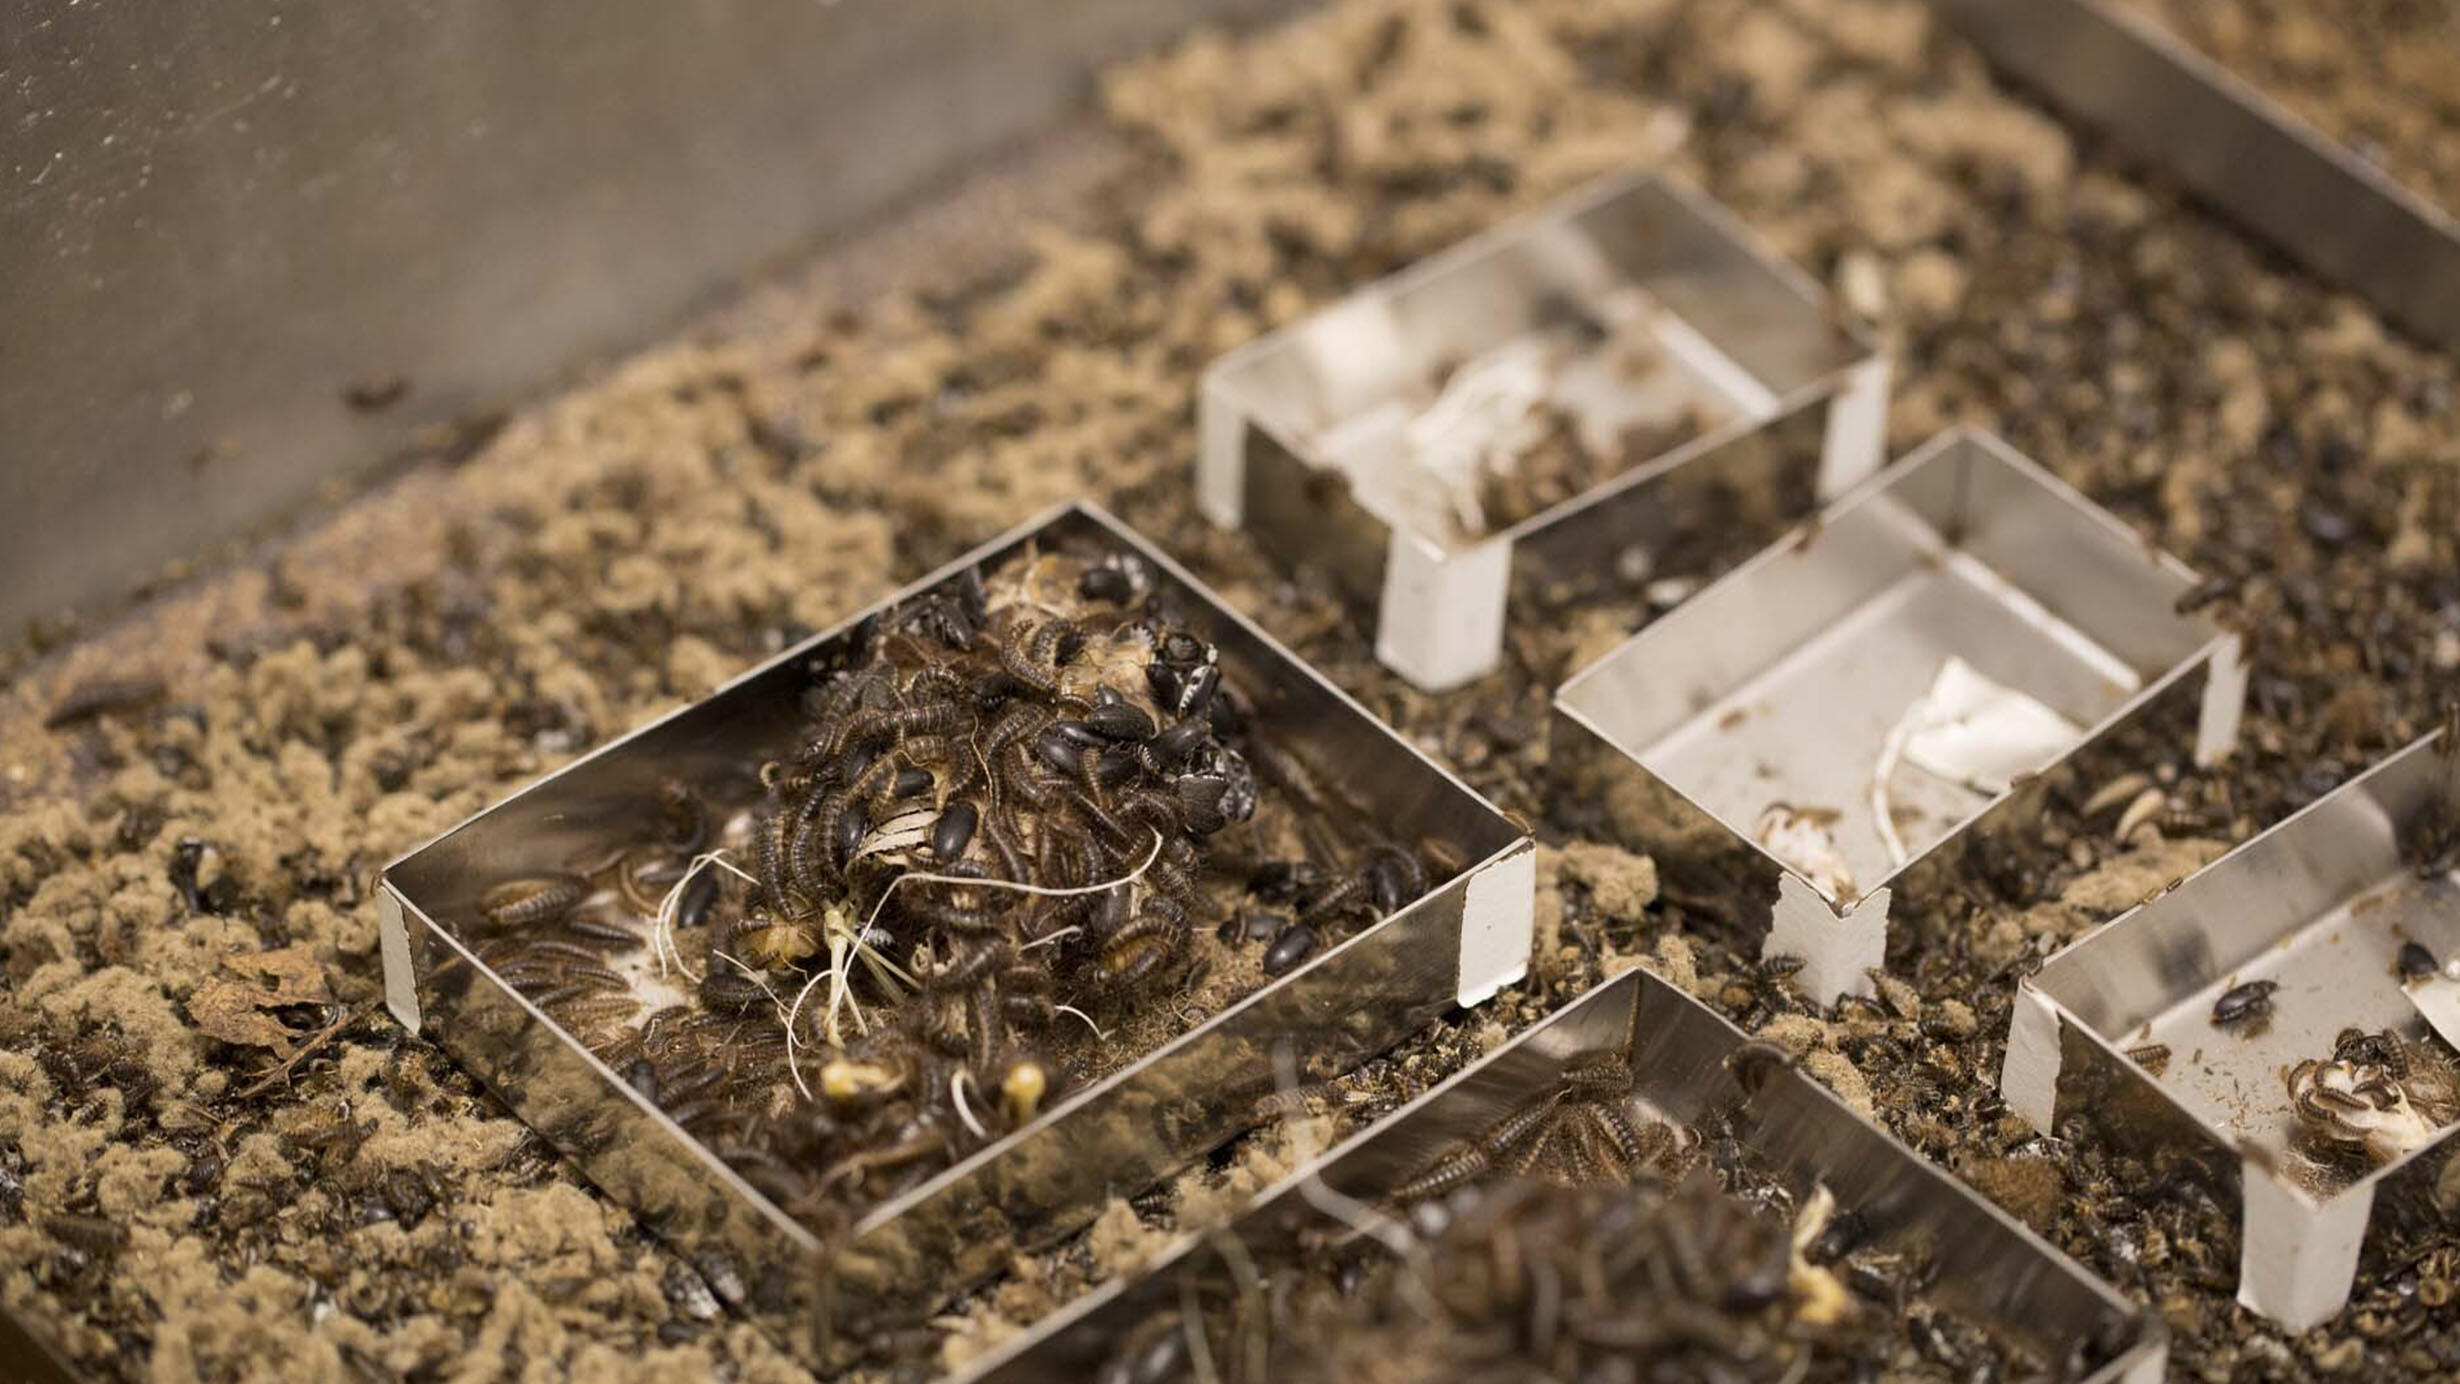 A colony of Dermestid beetles crawl around small metal trays containing specimens.